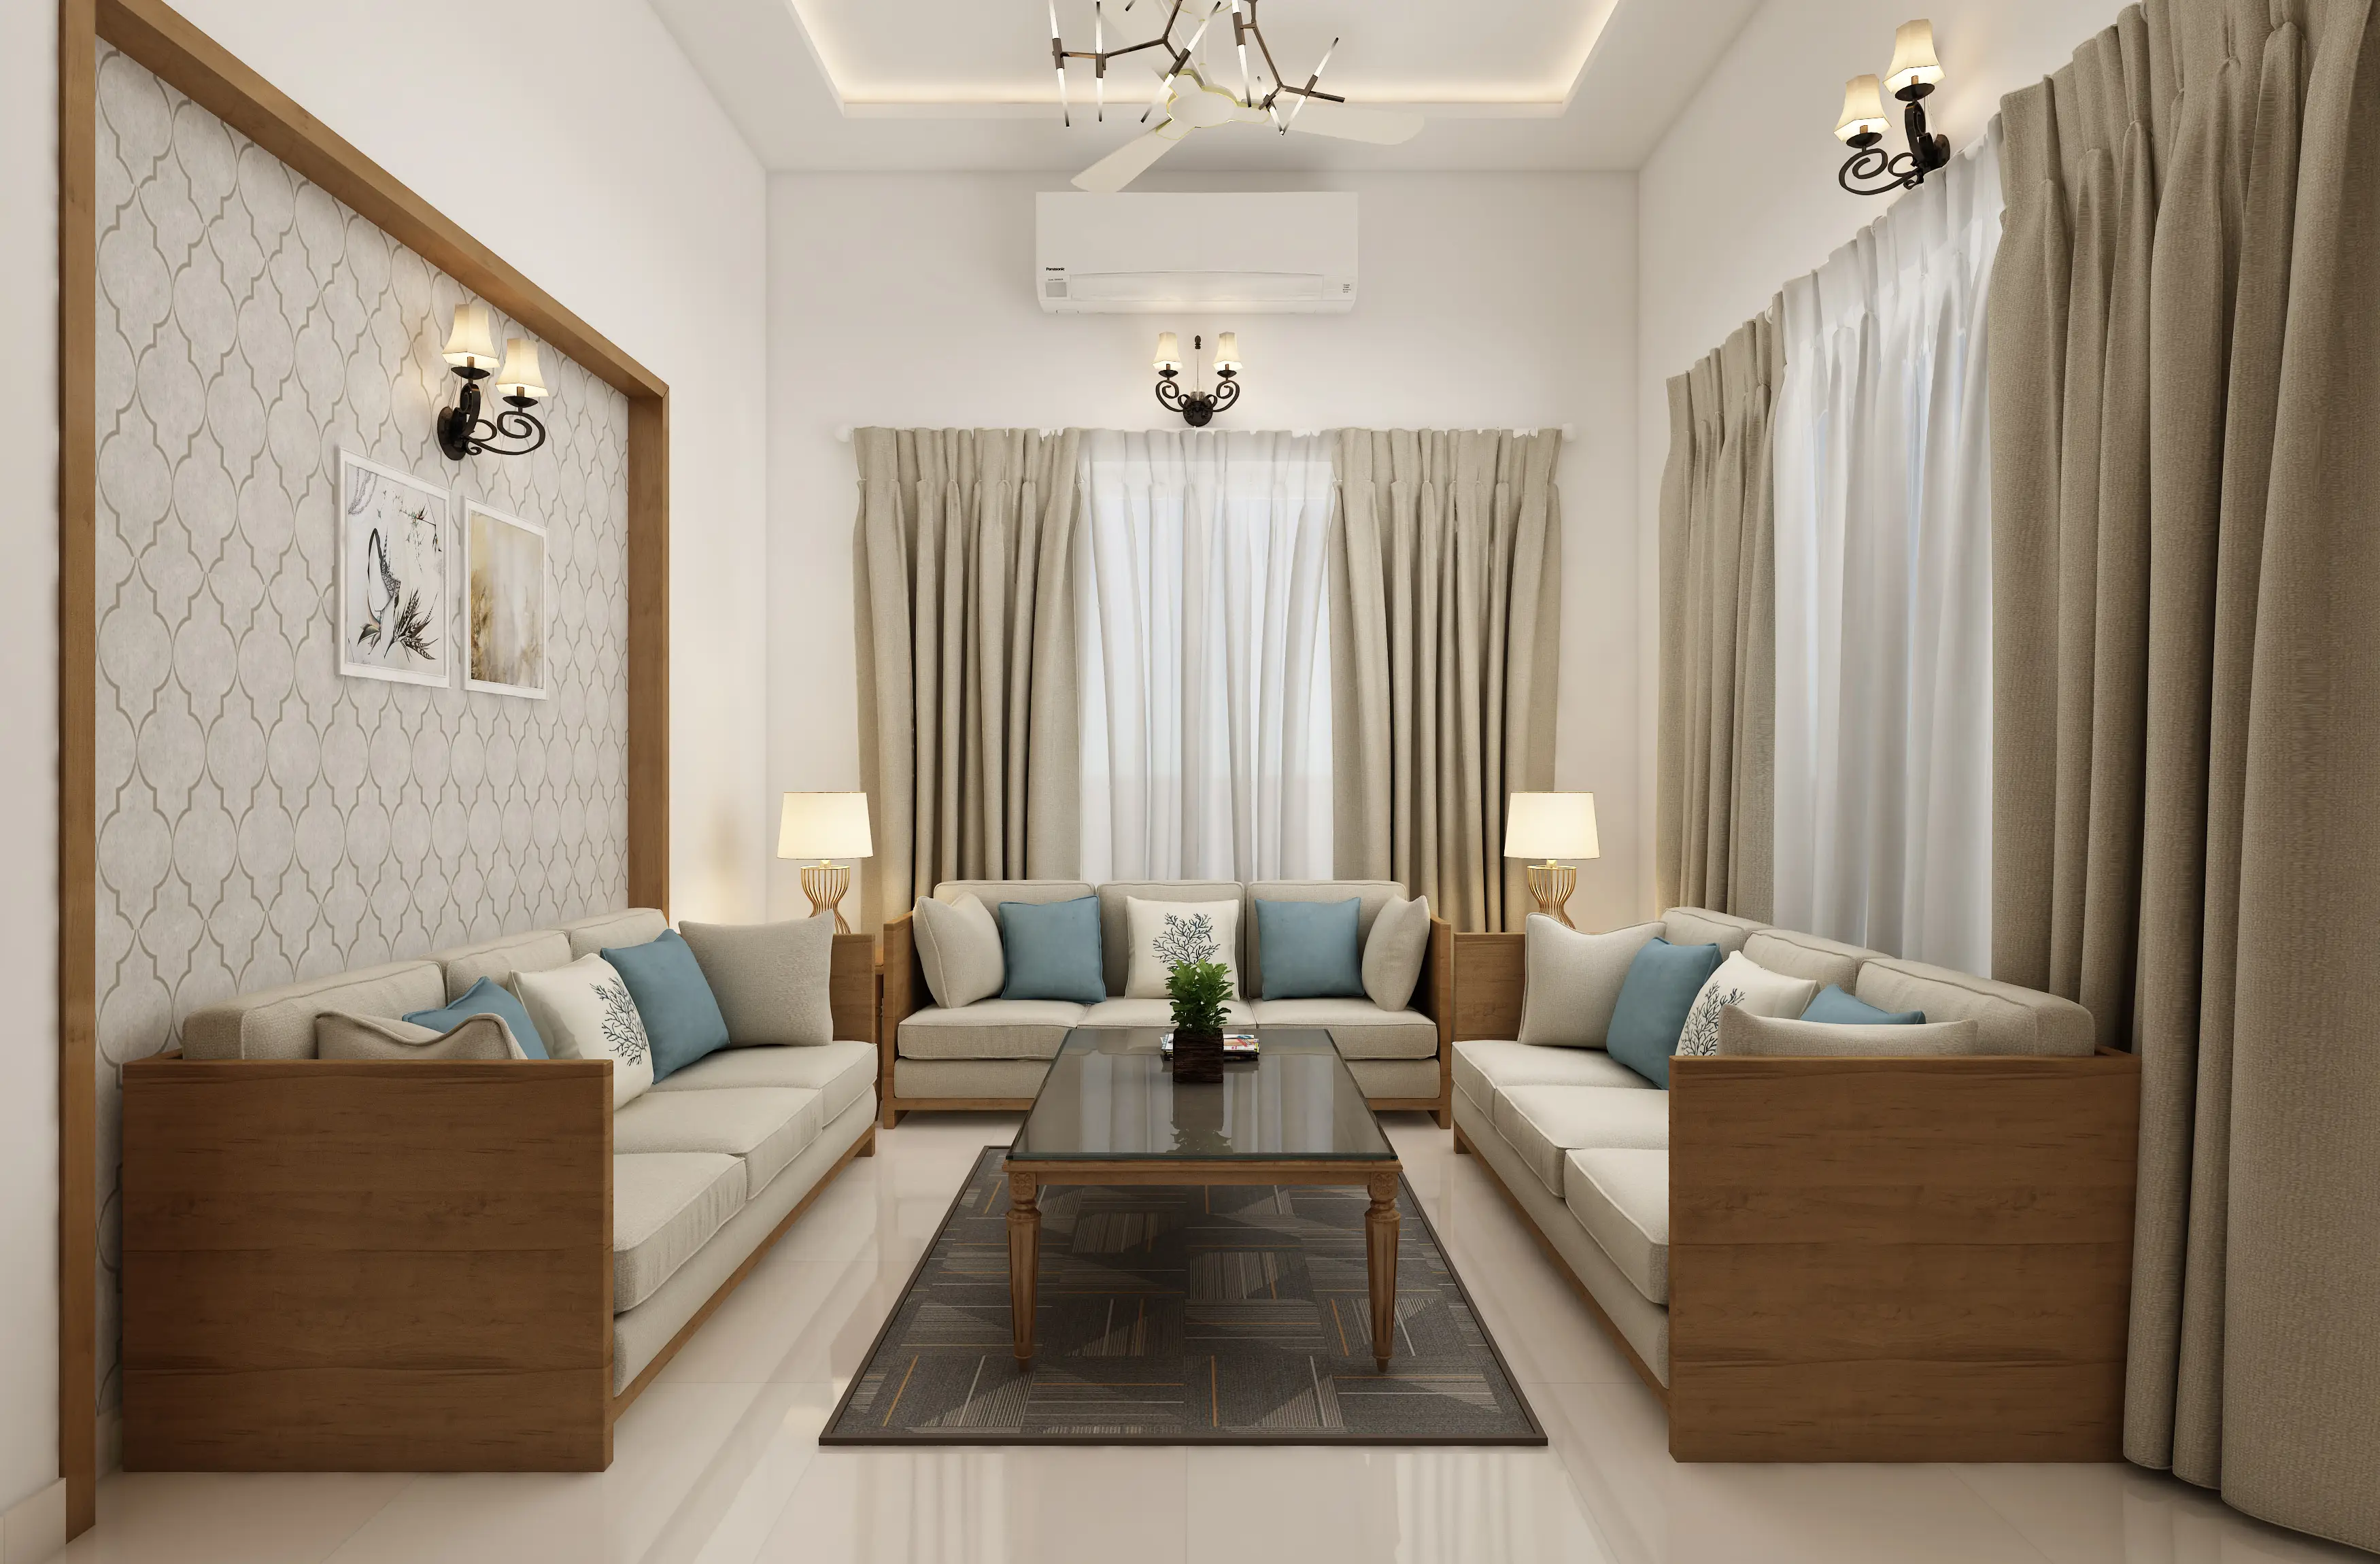 Interior of a living room that has been wonderfully furnished and illuminated